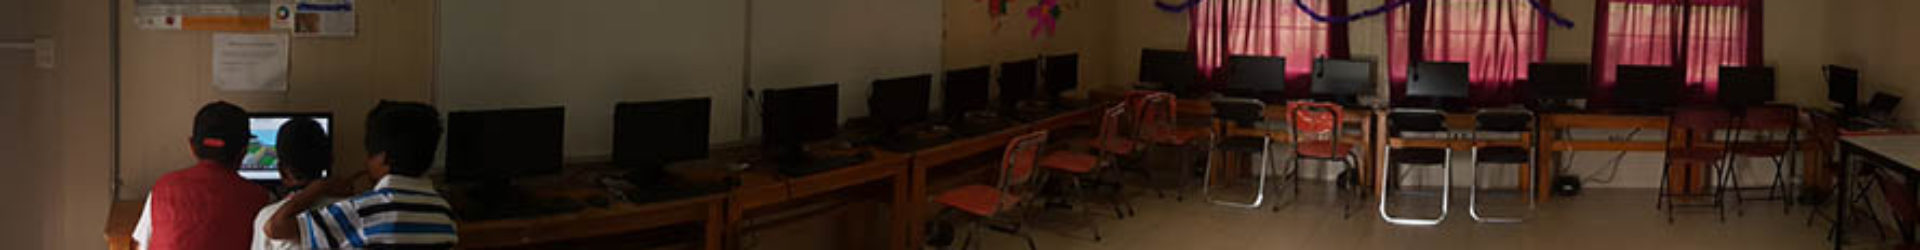 Welcome to our project, providing kids with computers for education